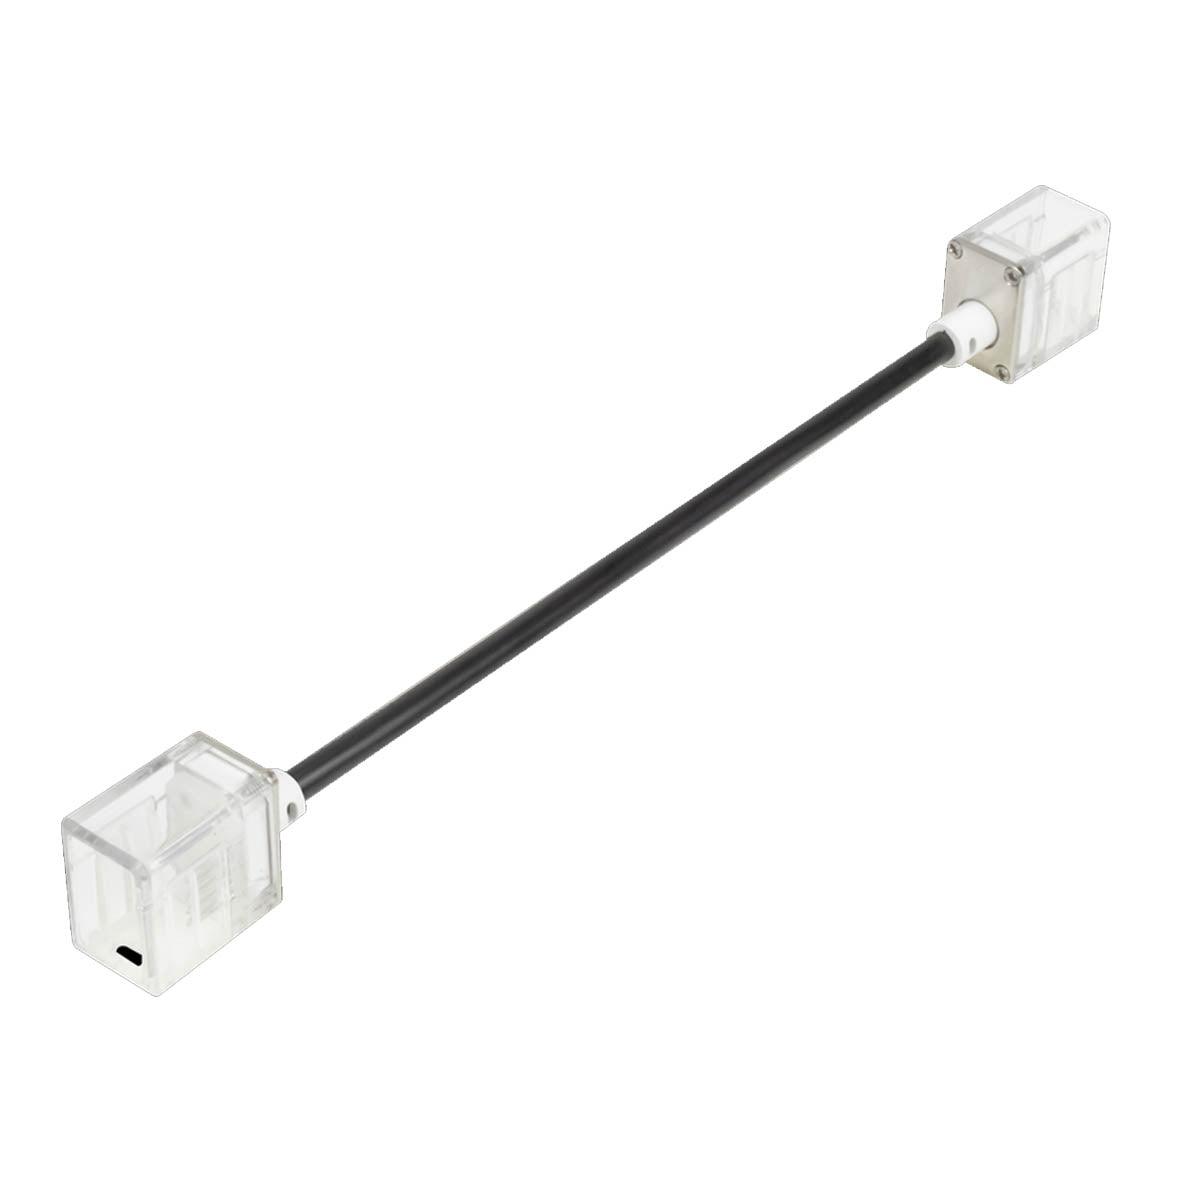 NeonFlex 36” Pro-L Linking Cable Front Feed (5-pin)